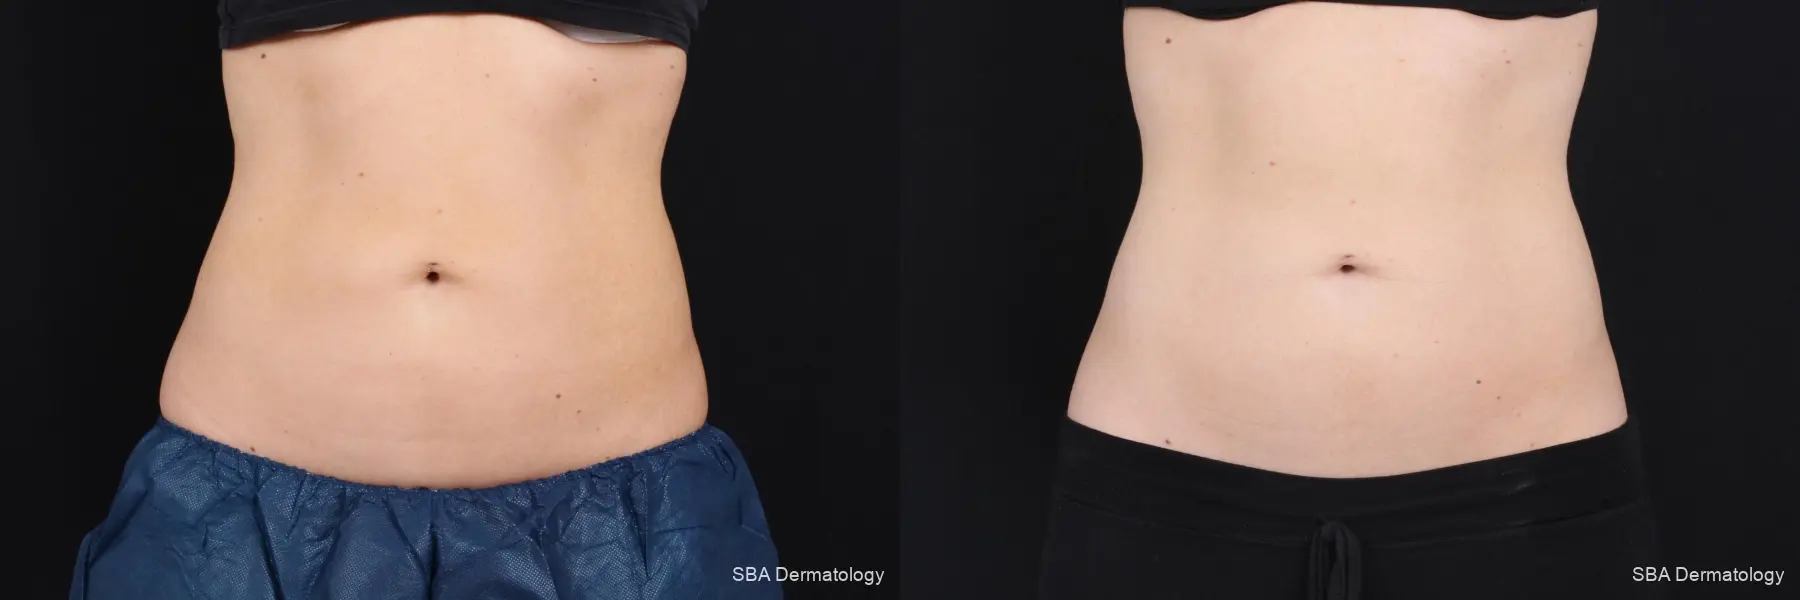 Coolsculpting: Patient 7 - Before and After  